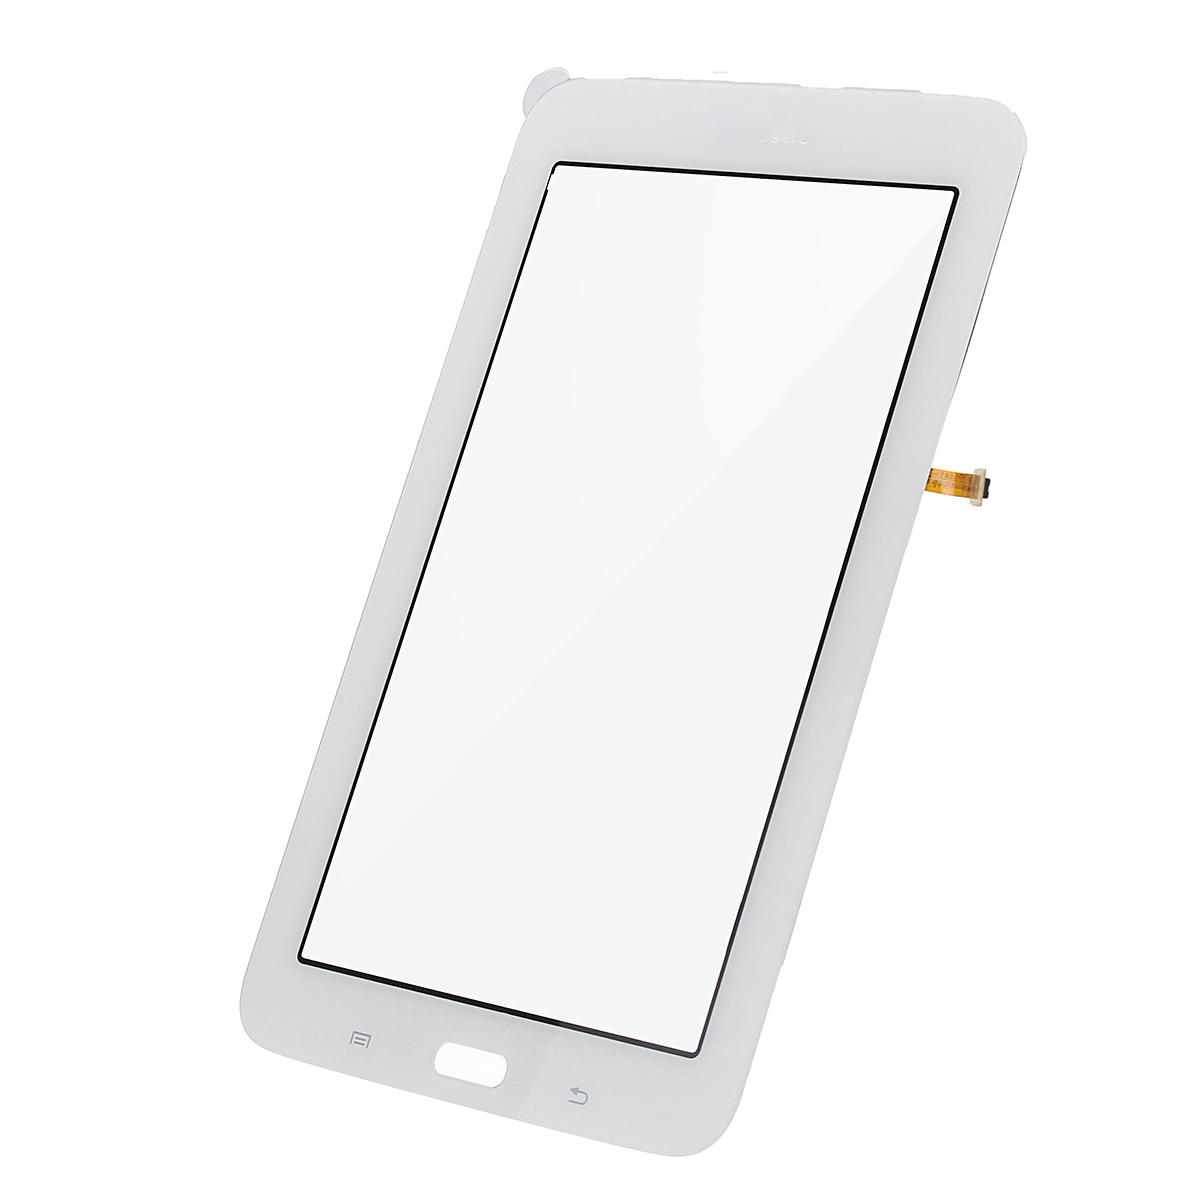 New Samsung Galaxy Tab 3 Lite Sm T110 7 0 Touch Screen Glass Digitizer Wifi Ver Other Tablet Ebook Accs Tablet Ebook Reader Accs